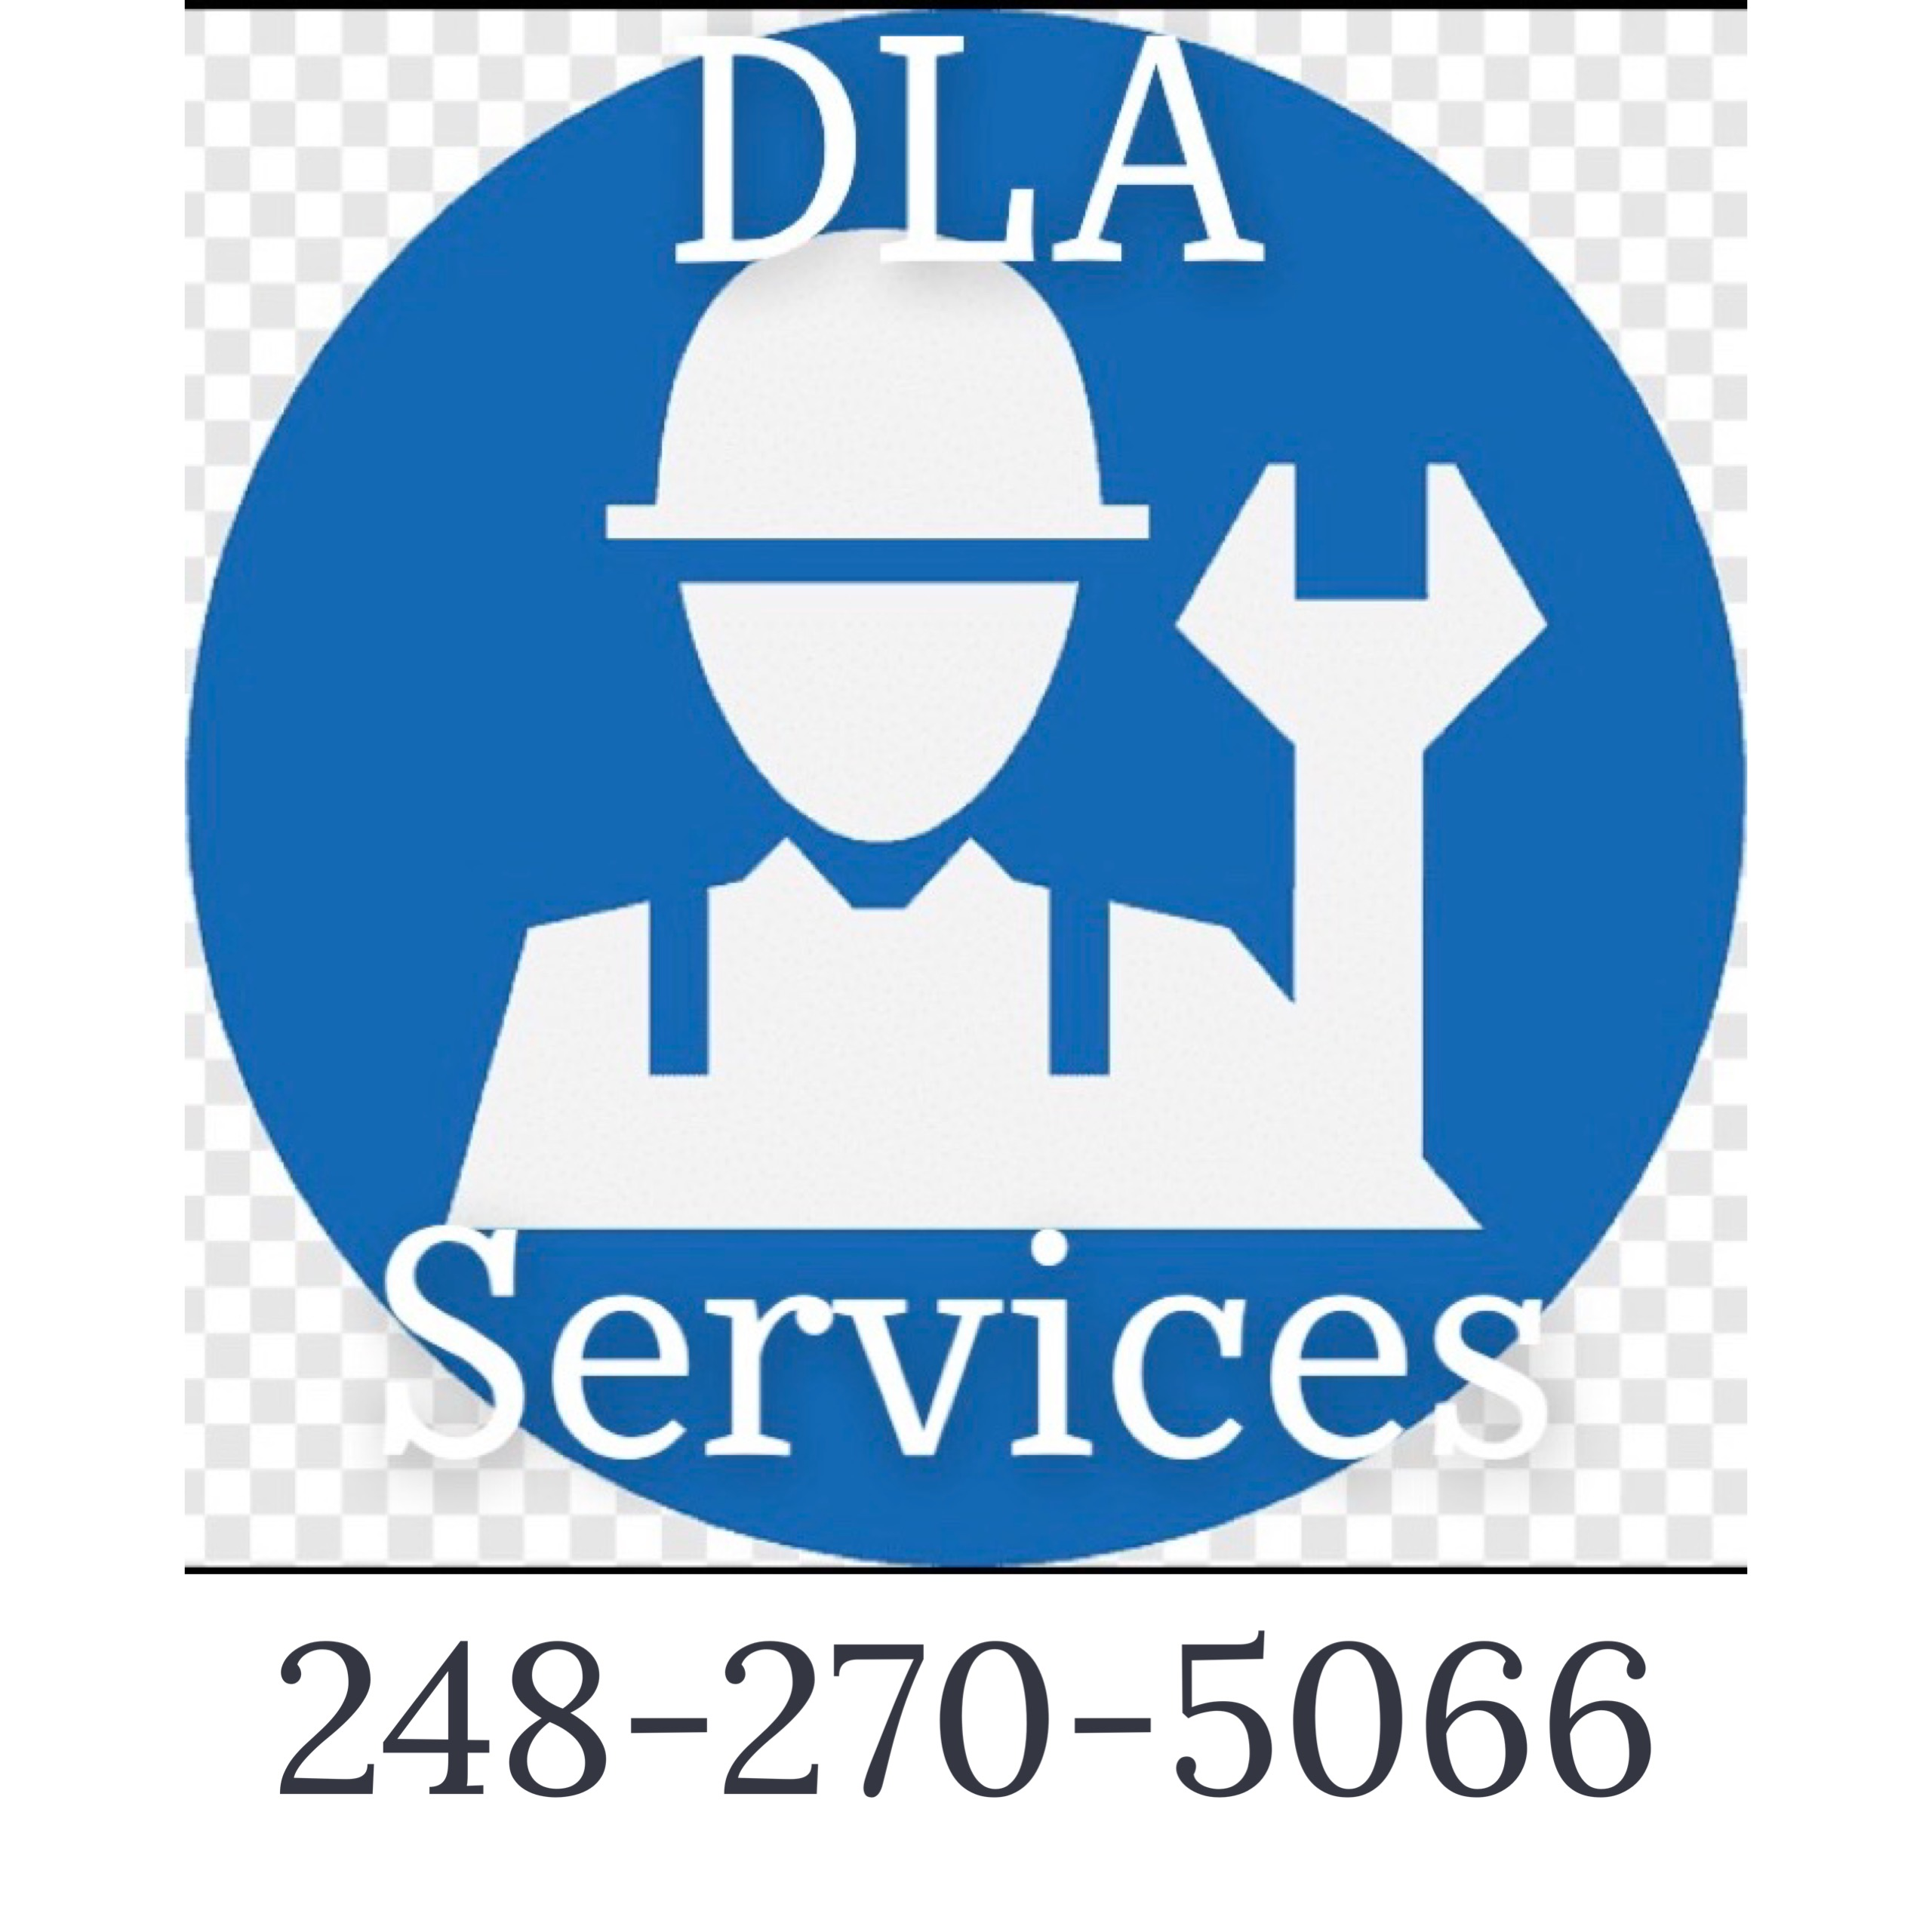 DLA SERVICES REPAIR AND REMODELING - Westland, MI 48186 - (248)270-5066 | ShowMeLocal.com